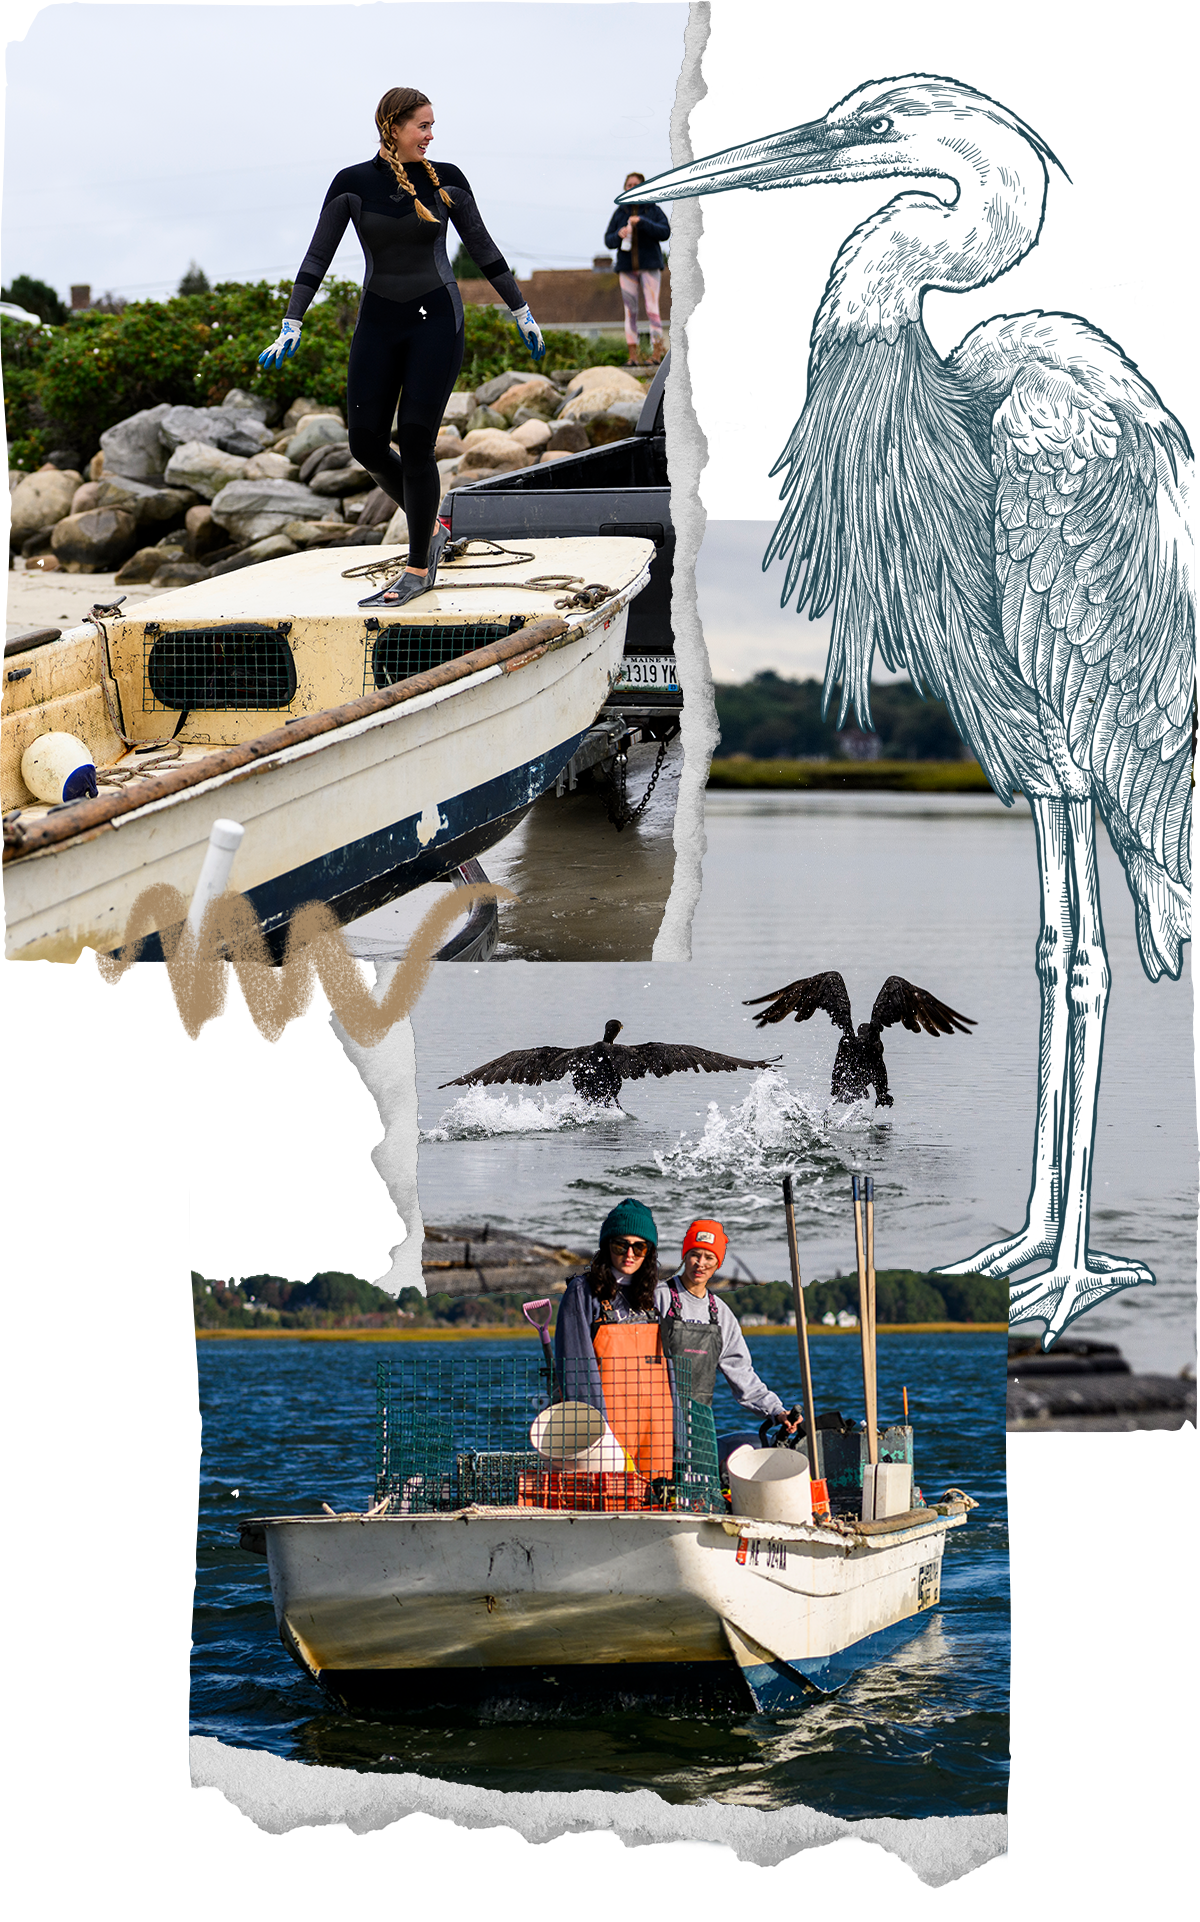 Collage of Nonesuch staff and co-op students in the skiff, herons skimming the water, and an illustration of a heron.